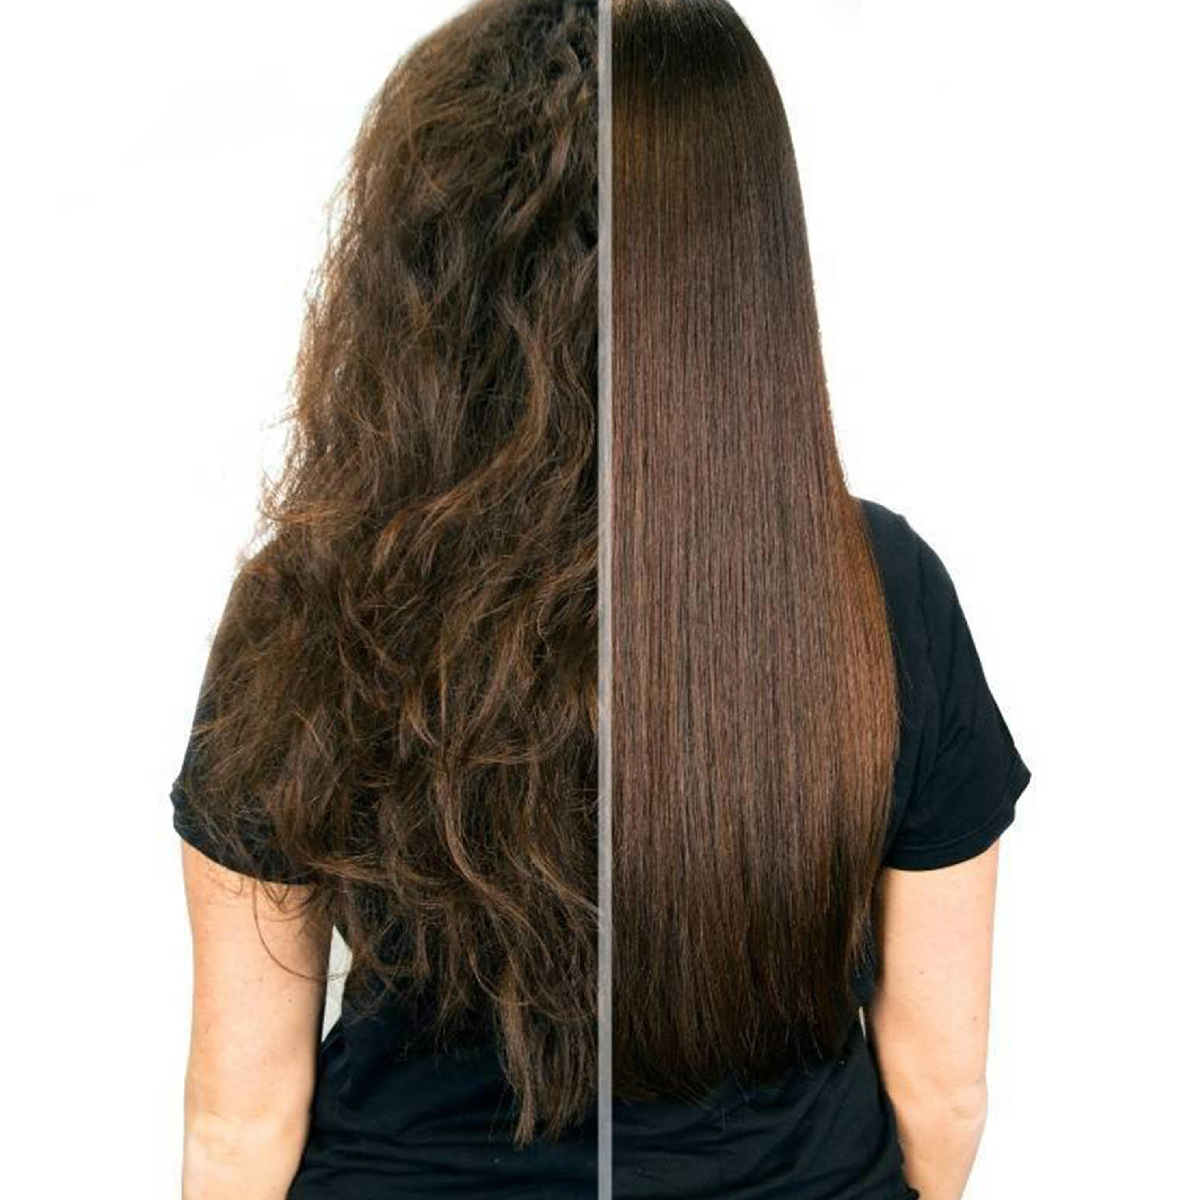 Featured image for "Hair Smoothing Treatments: How to Choose Which Type is Best for You"